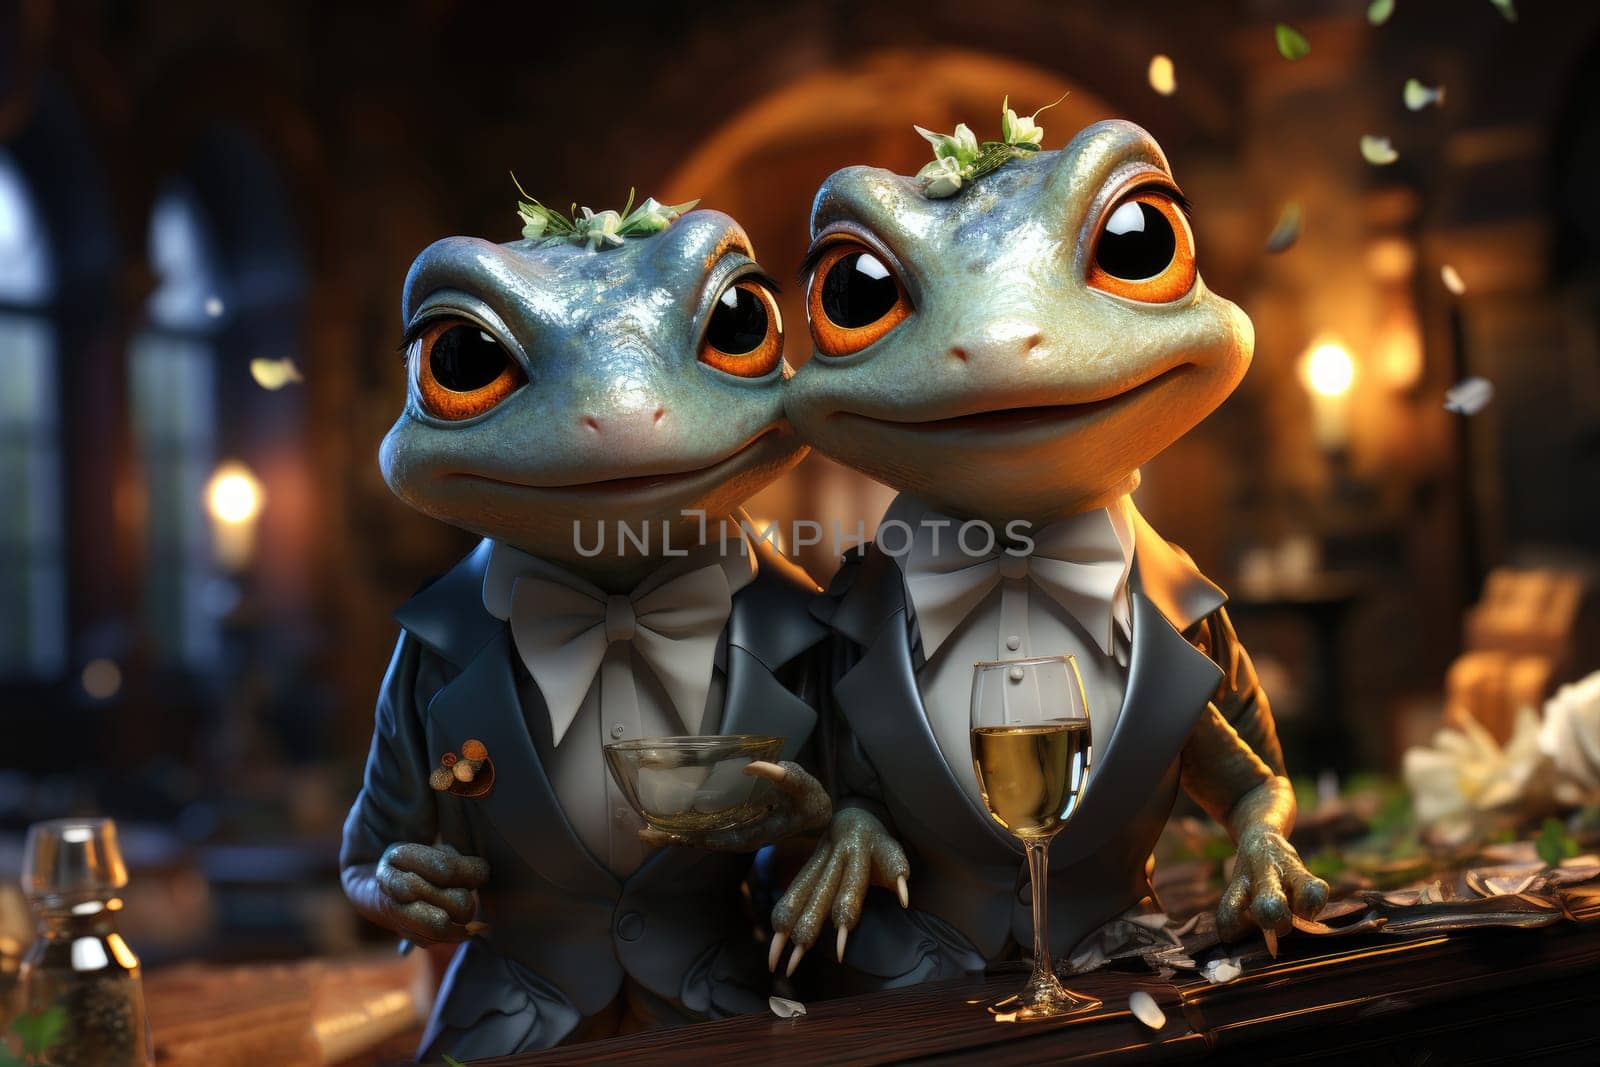 Magical wedding of frogs in a fairytale pond by Yurich32